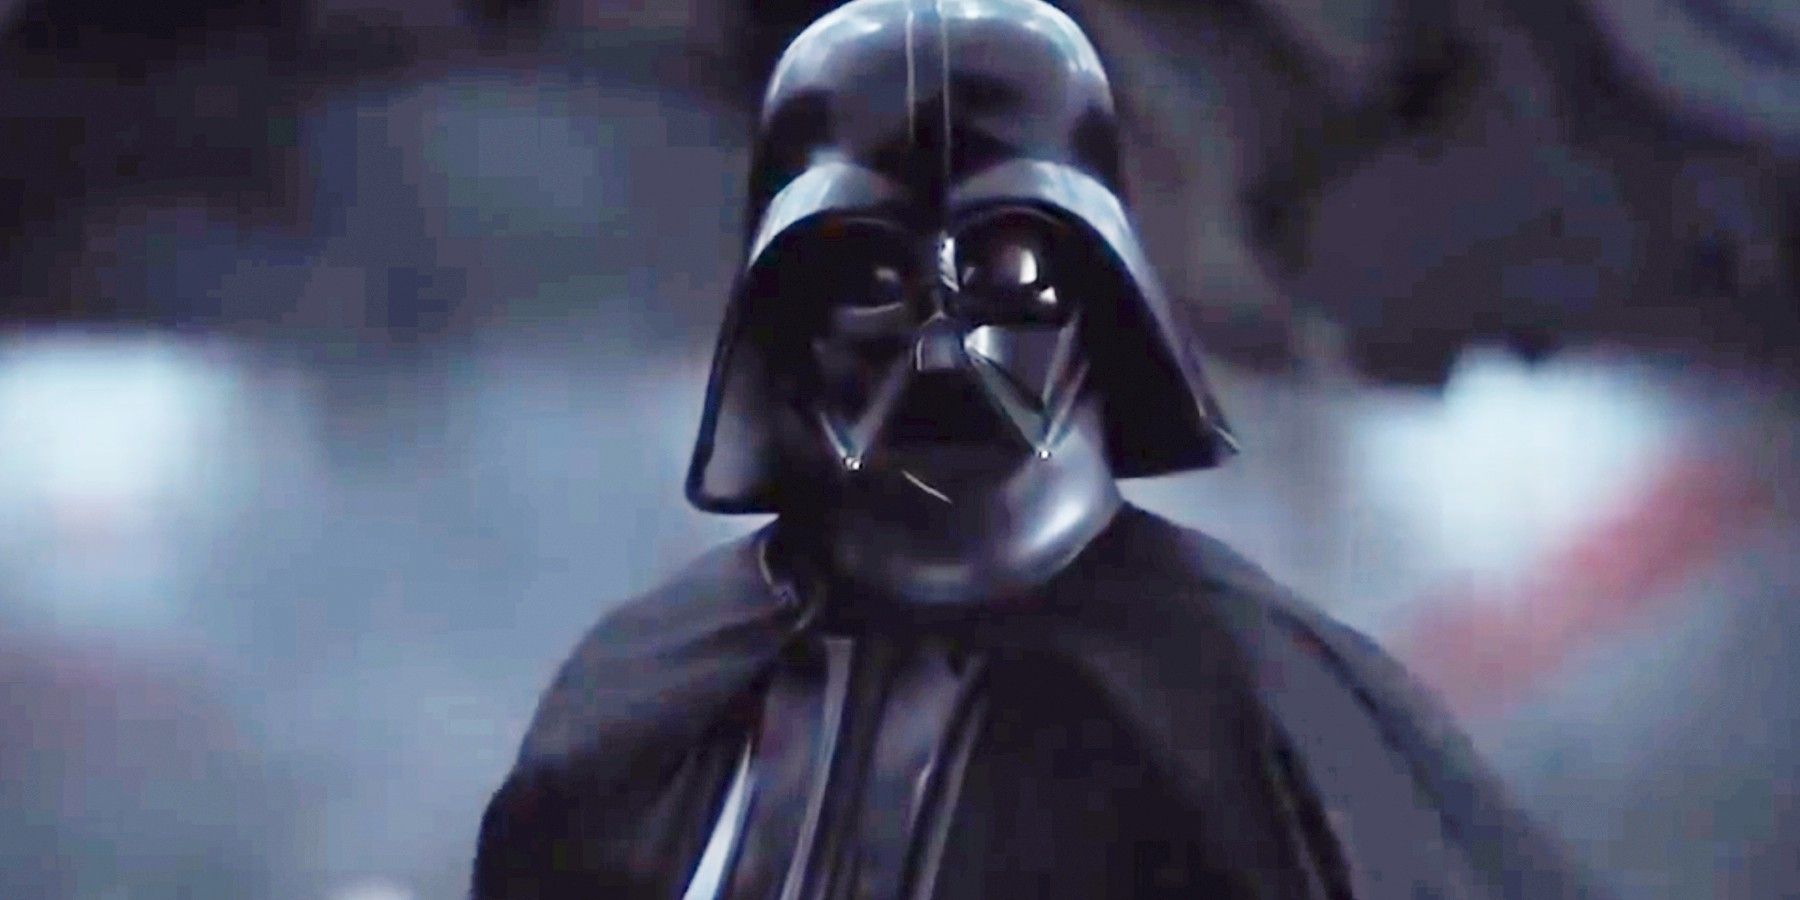 Rogue One Director Compares Filming Darth Vader to a Car Commercial